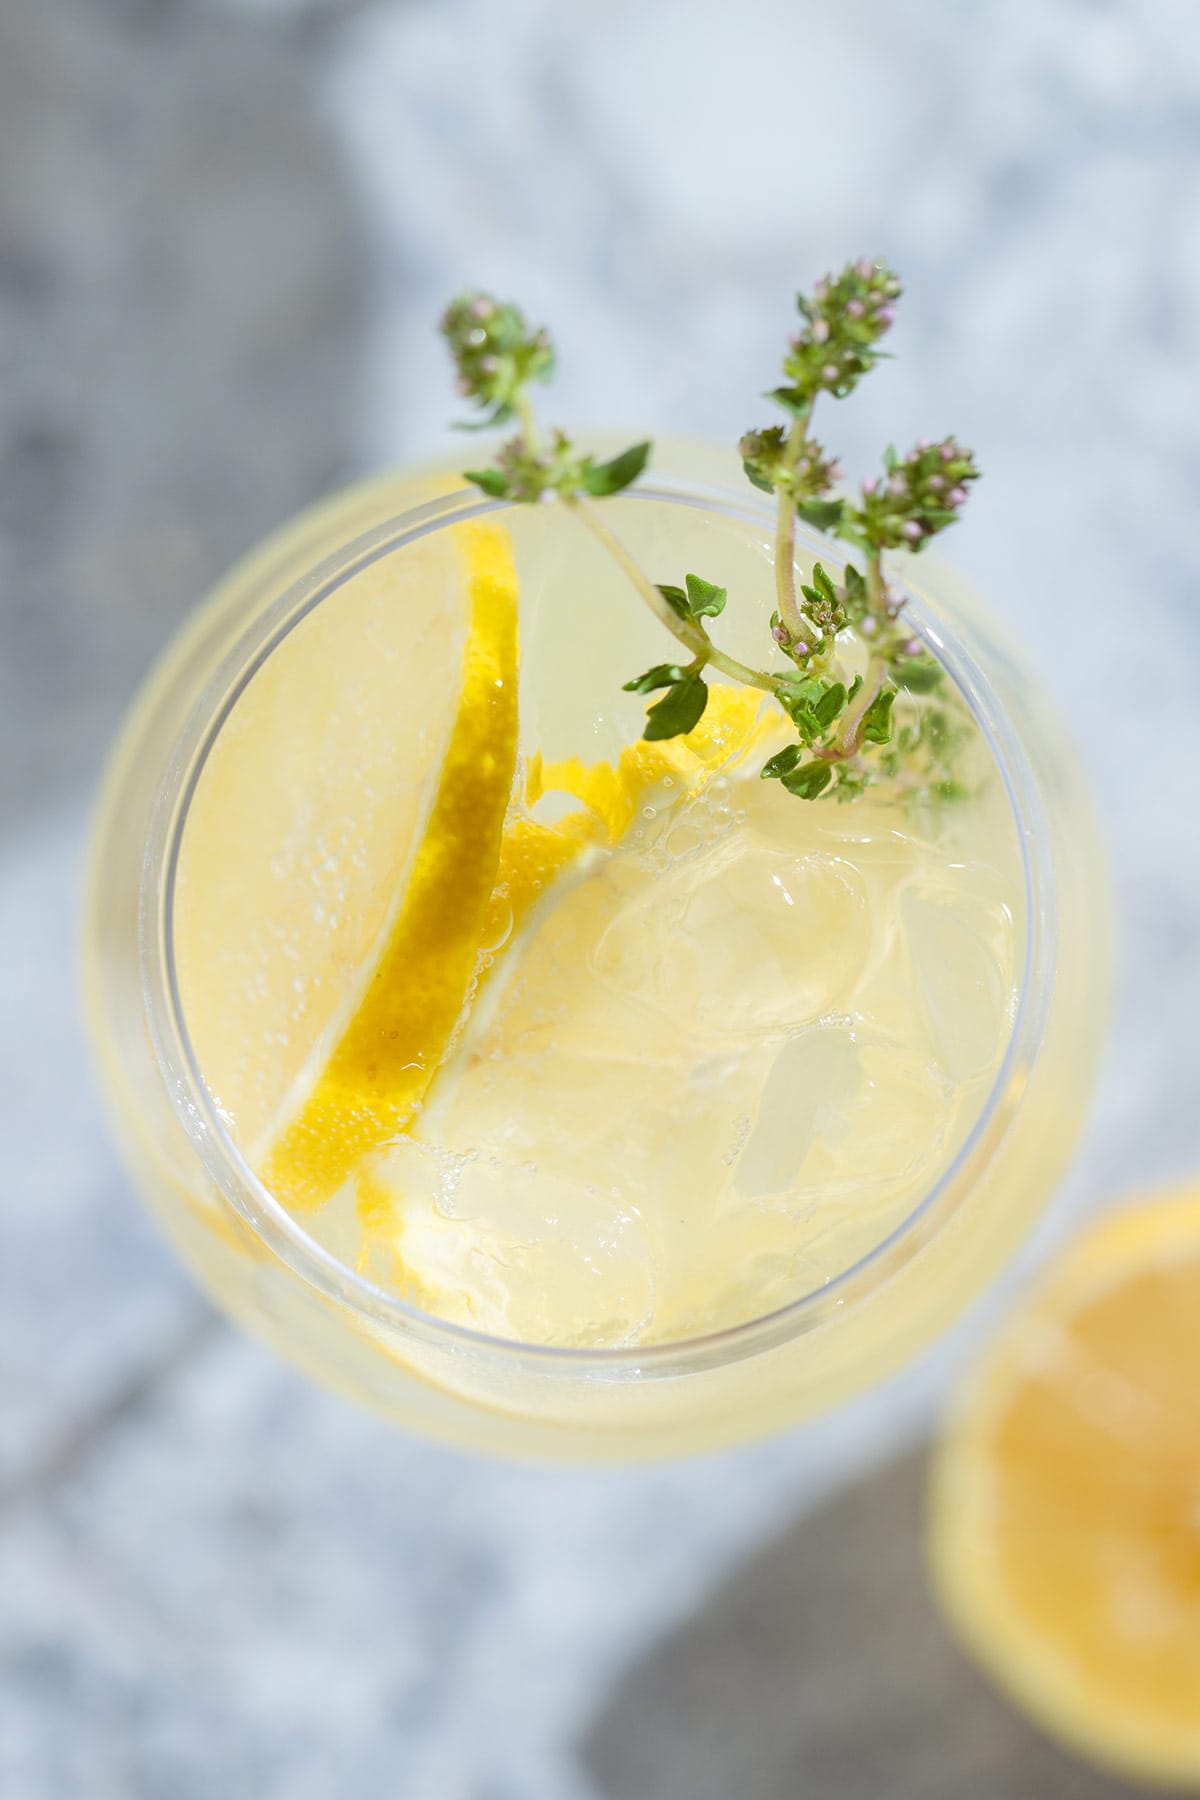 A tall white wine glass with a lemon spritzer garnished with lemon slices and fresh thyme.